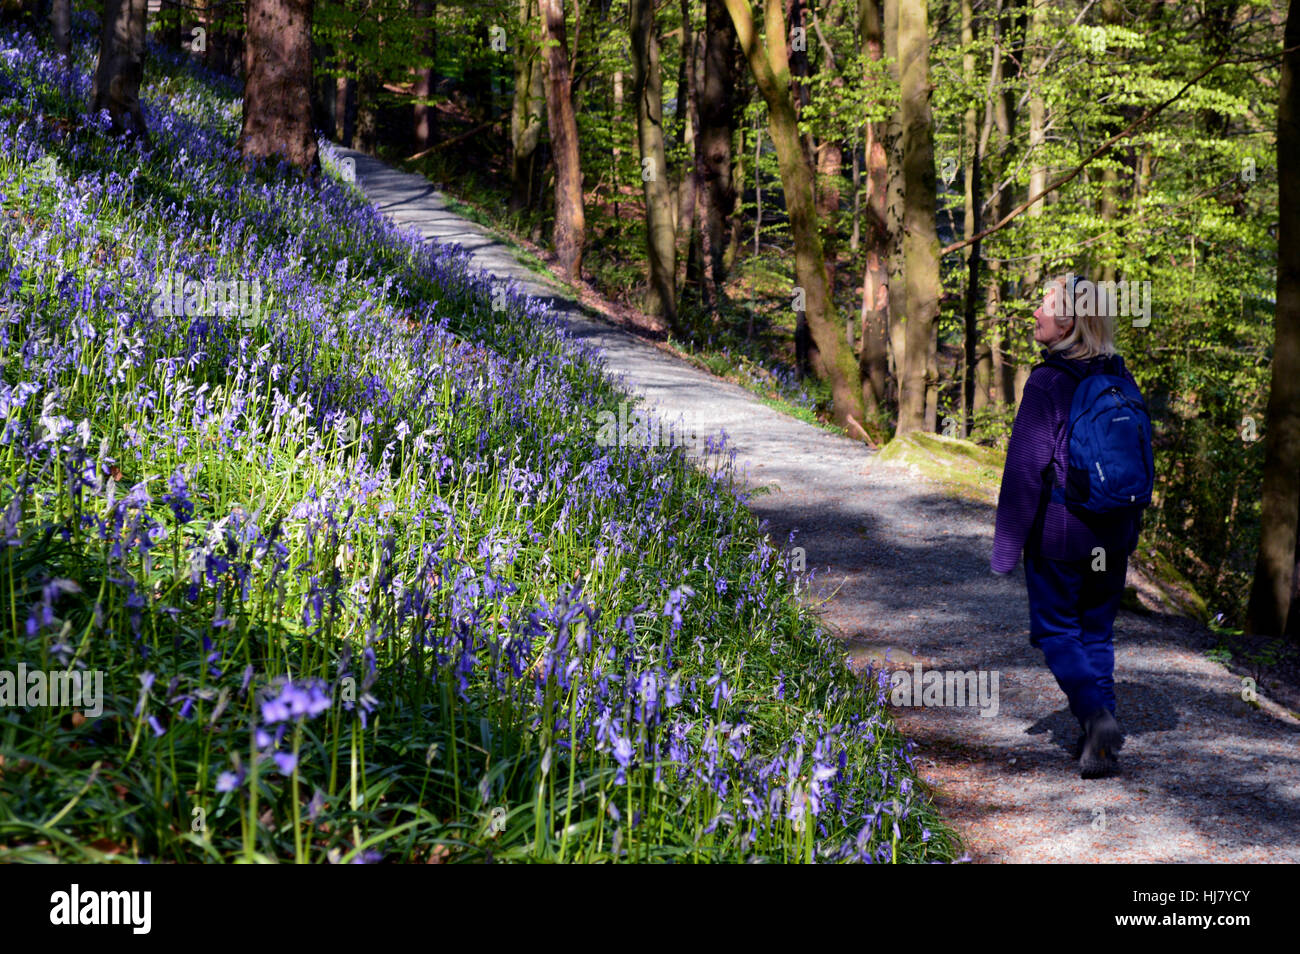 Solitary Lady Walking through Bluebells in Strid Wood part of the Dales Way Long Distance Footpath Wharfedale, Yorkshire Dales National Park, UK Stock Photo